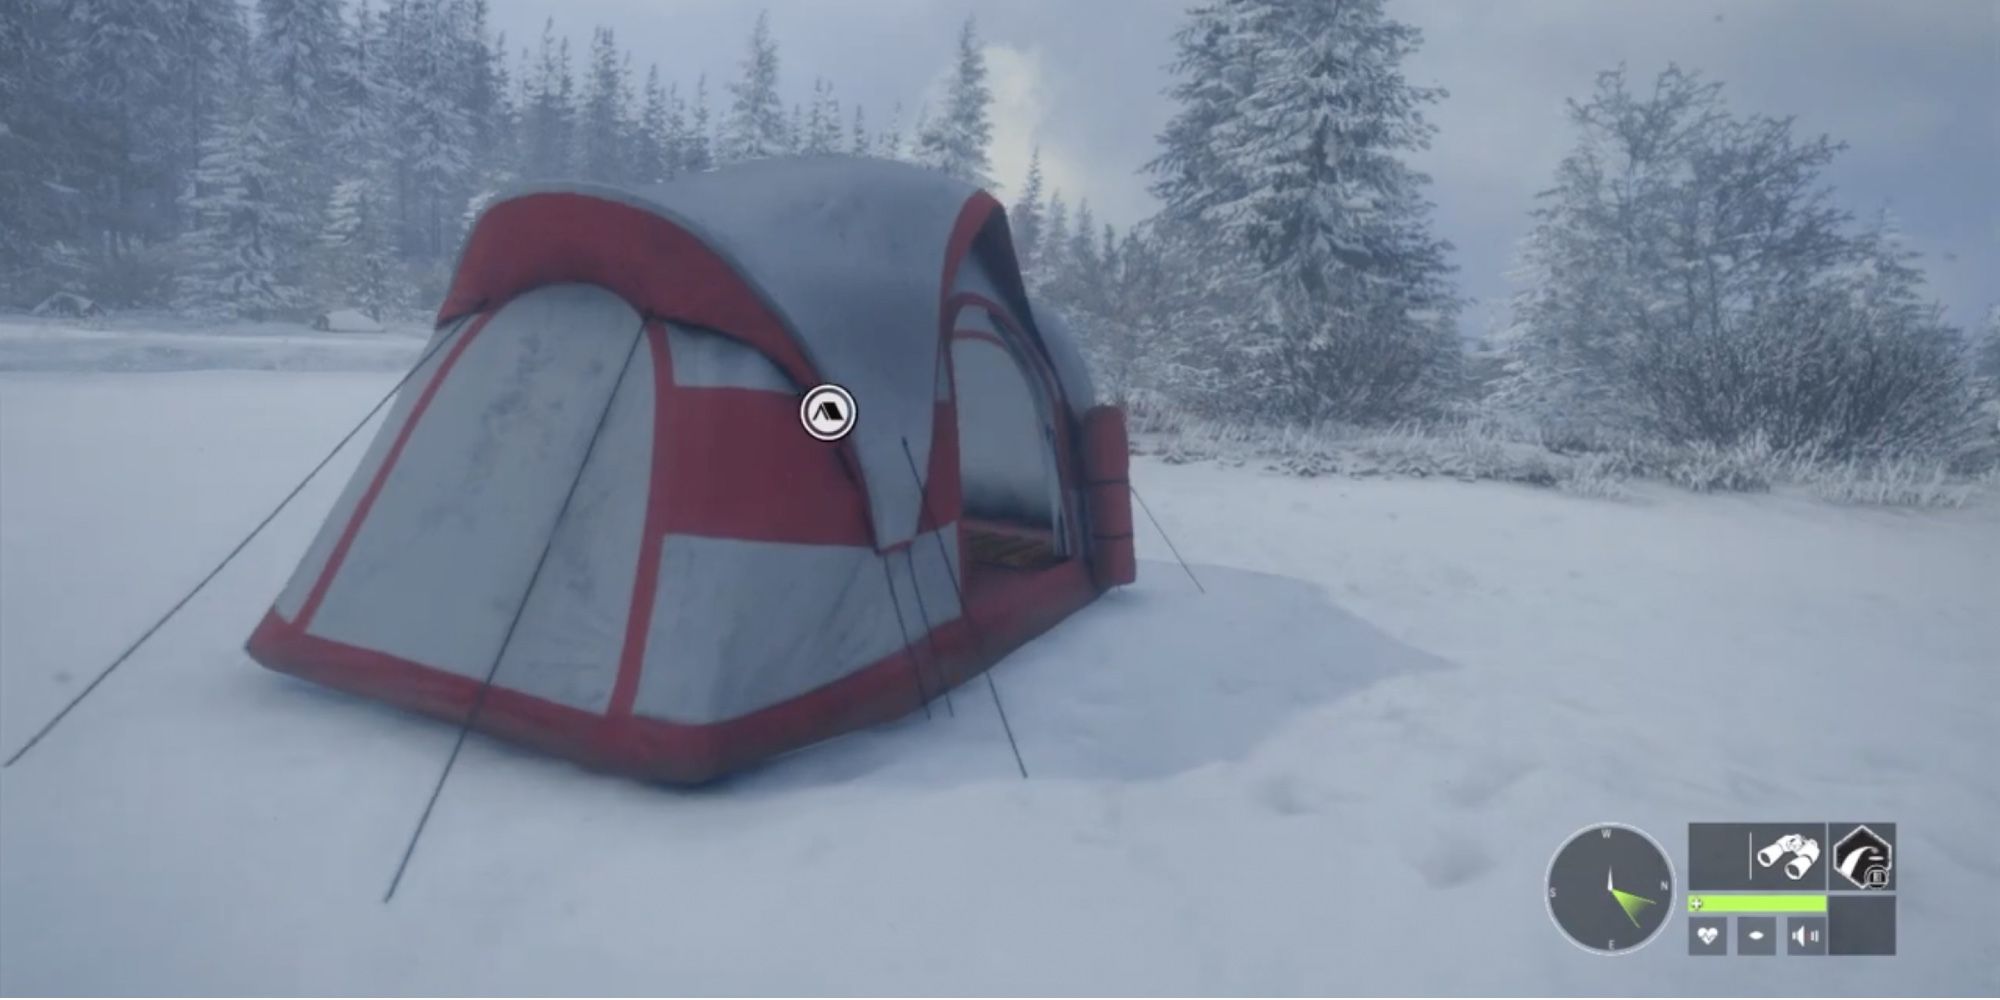 TheHunter - Call of the Wild - Pitch Tents to Take Shelter - Player sets up tent on a snow-filled terrain